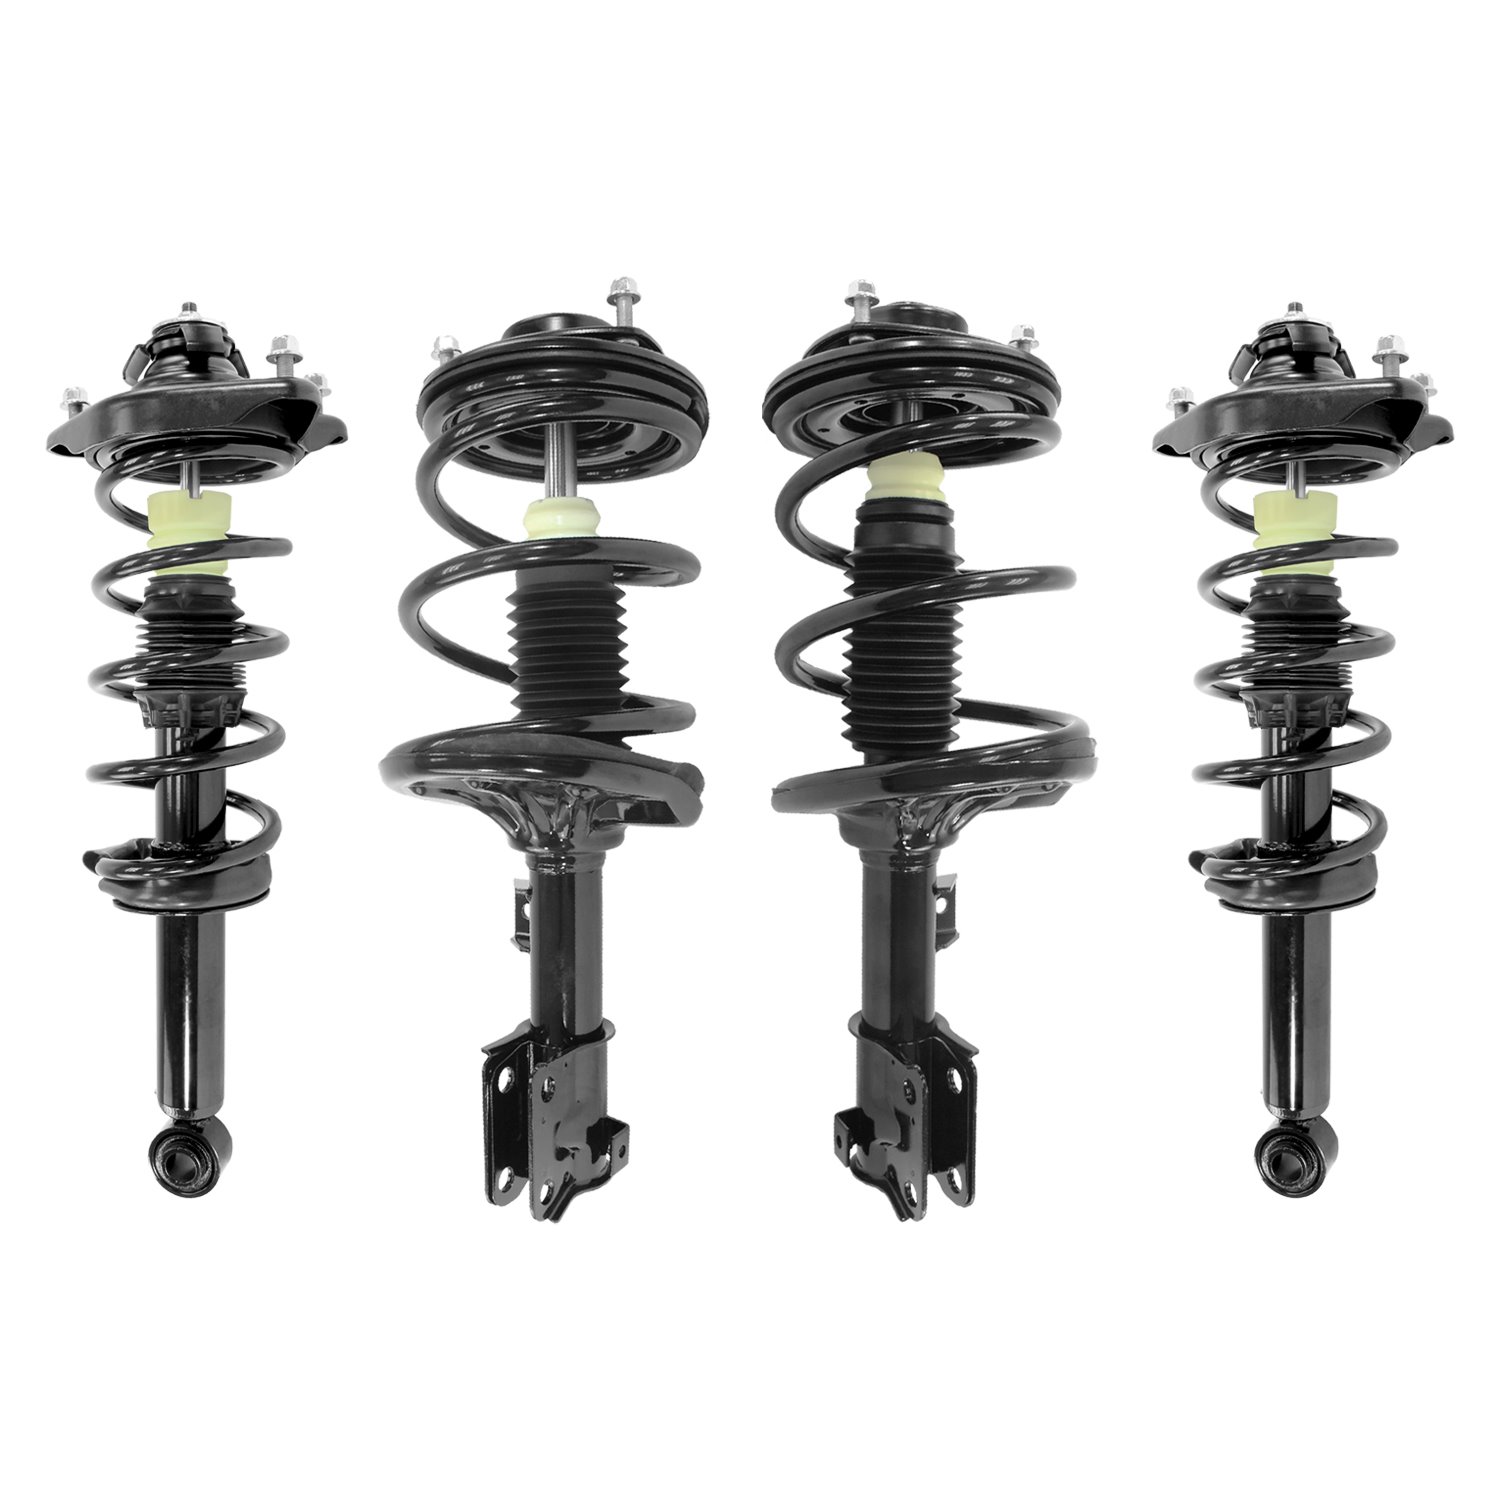 4-13701-16150-001 Front & Rear Complete Strut Assembly Kit Fits Select Mitsubishi Eclipse